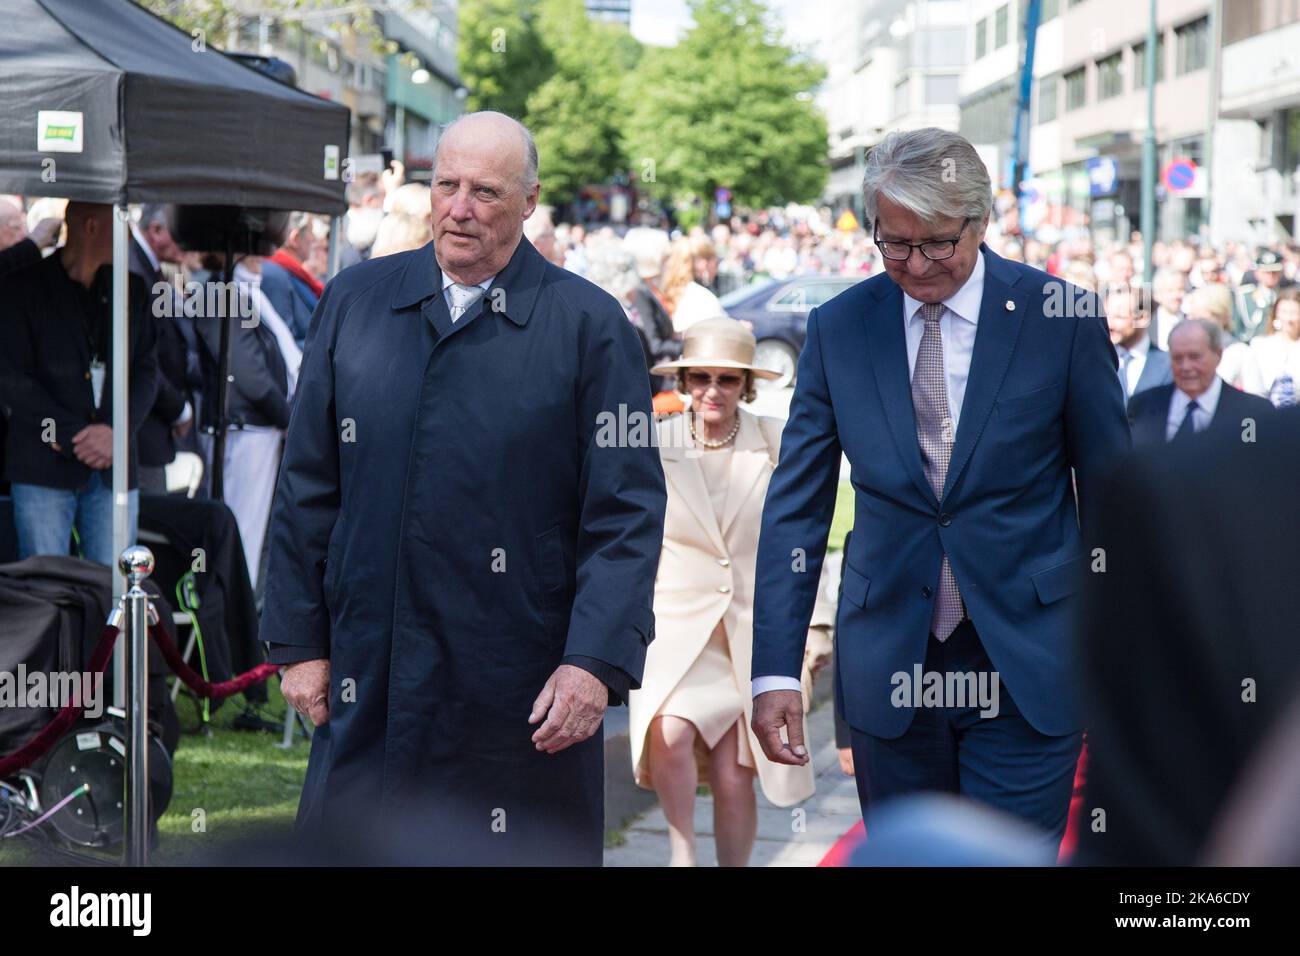 Oslo,Norway 20150607. King Harald and Mayor Fabian Stang arrive commemoration of the 70 anniversary of the royal family returning home after WW2 the Town Hall Square in Oslo on Sunday. Photo: Audun Braastad / NTB scanpix Stock Photo